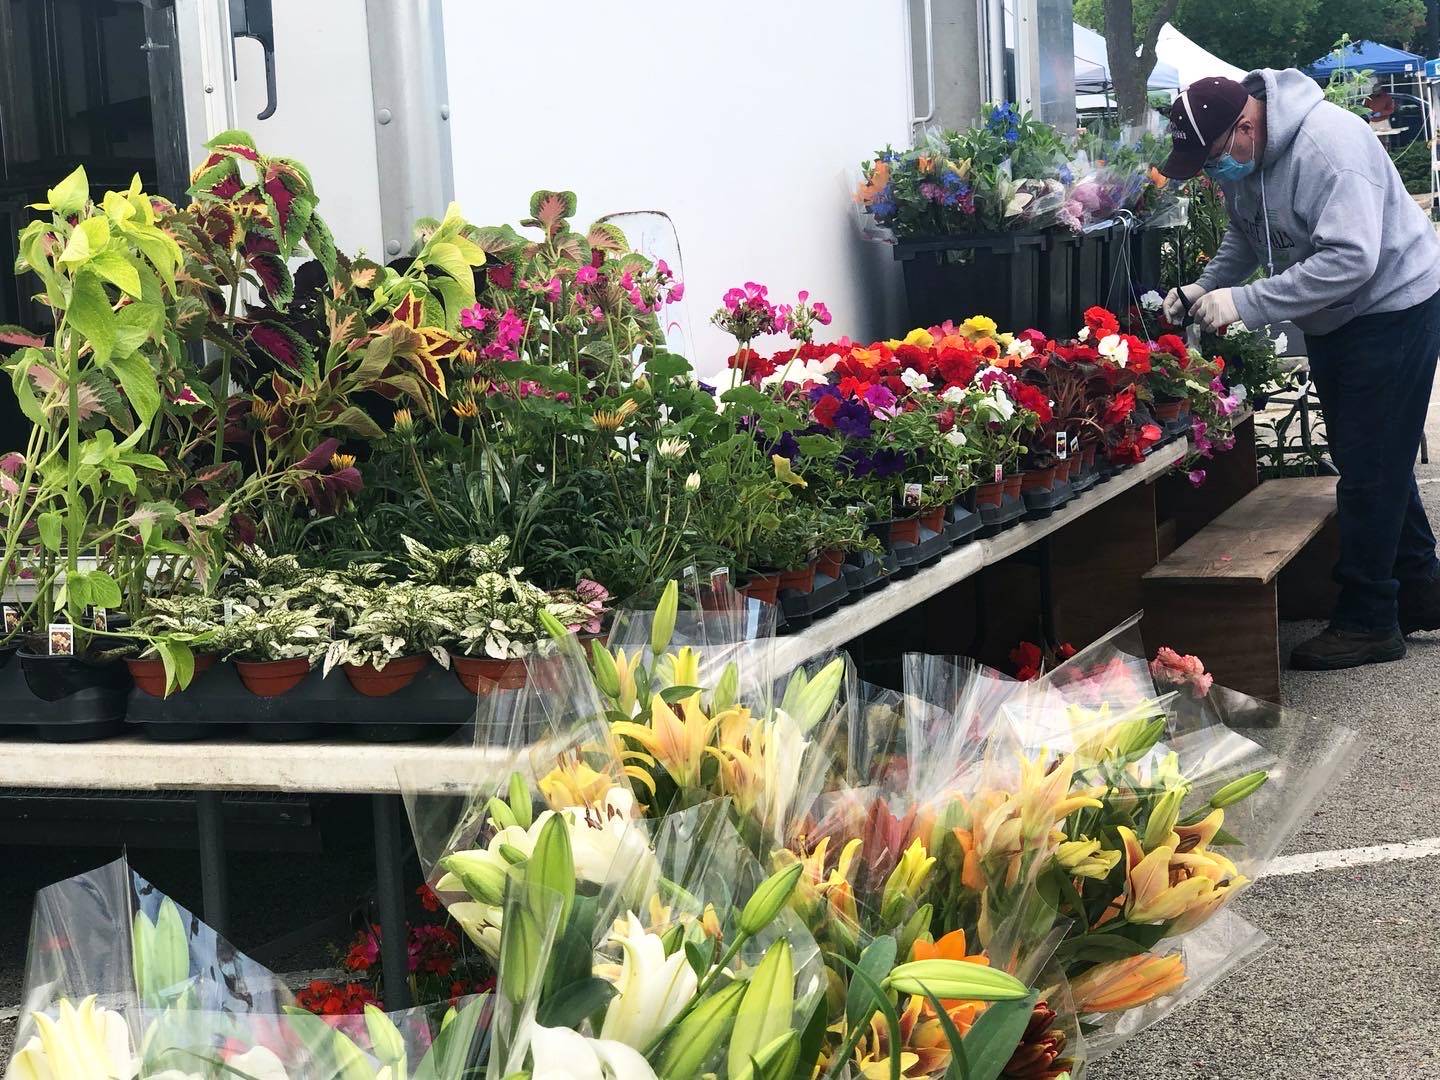 A lot of flowers are on a table and several on the parking lot concrete as a worker gathers flowers to sell to a buyer at the farmers market. Photo by Alyssa Buckley.